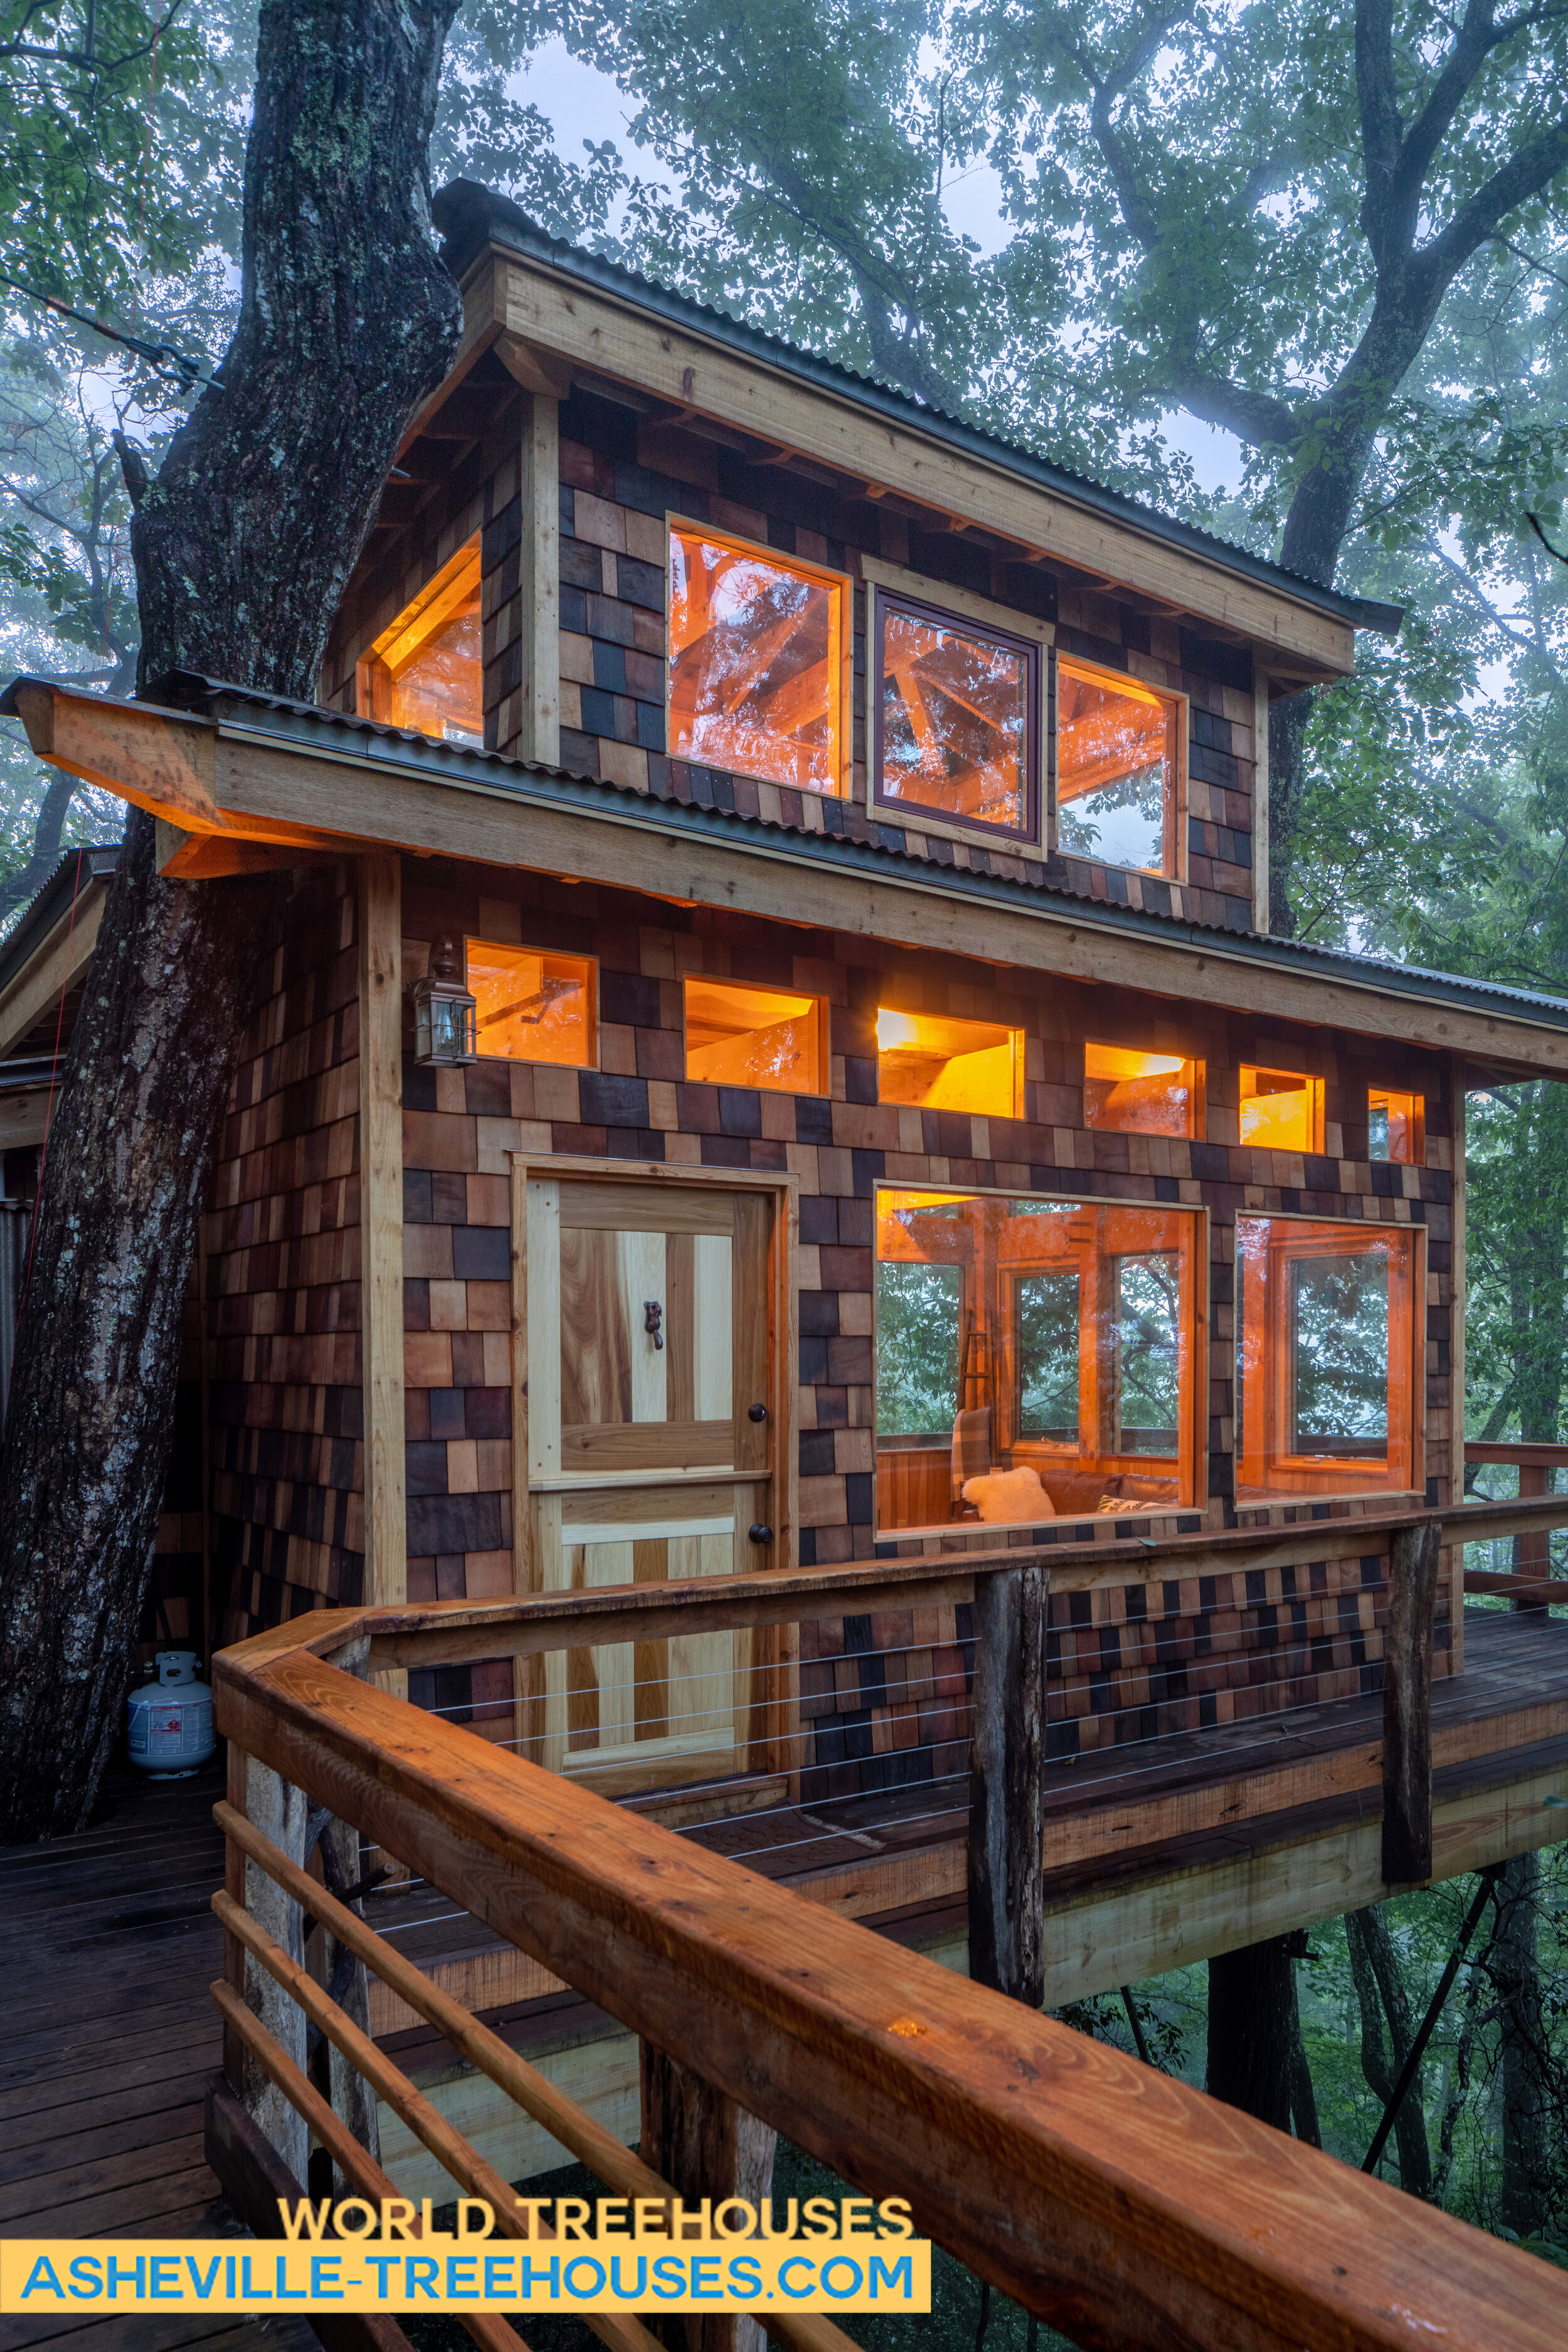 20210104-World-Treehouses-Asheville-custom-treehouse-builders-Shinrin-Yoku-timber-frame-treehouse-handcrafted-with-courage-74.jpg